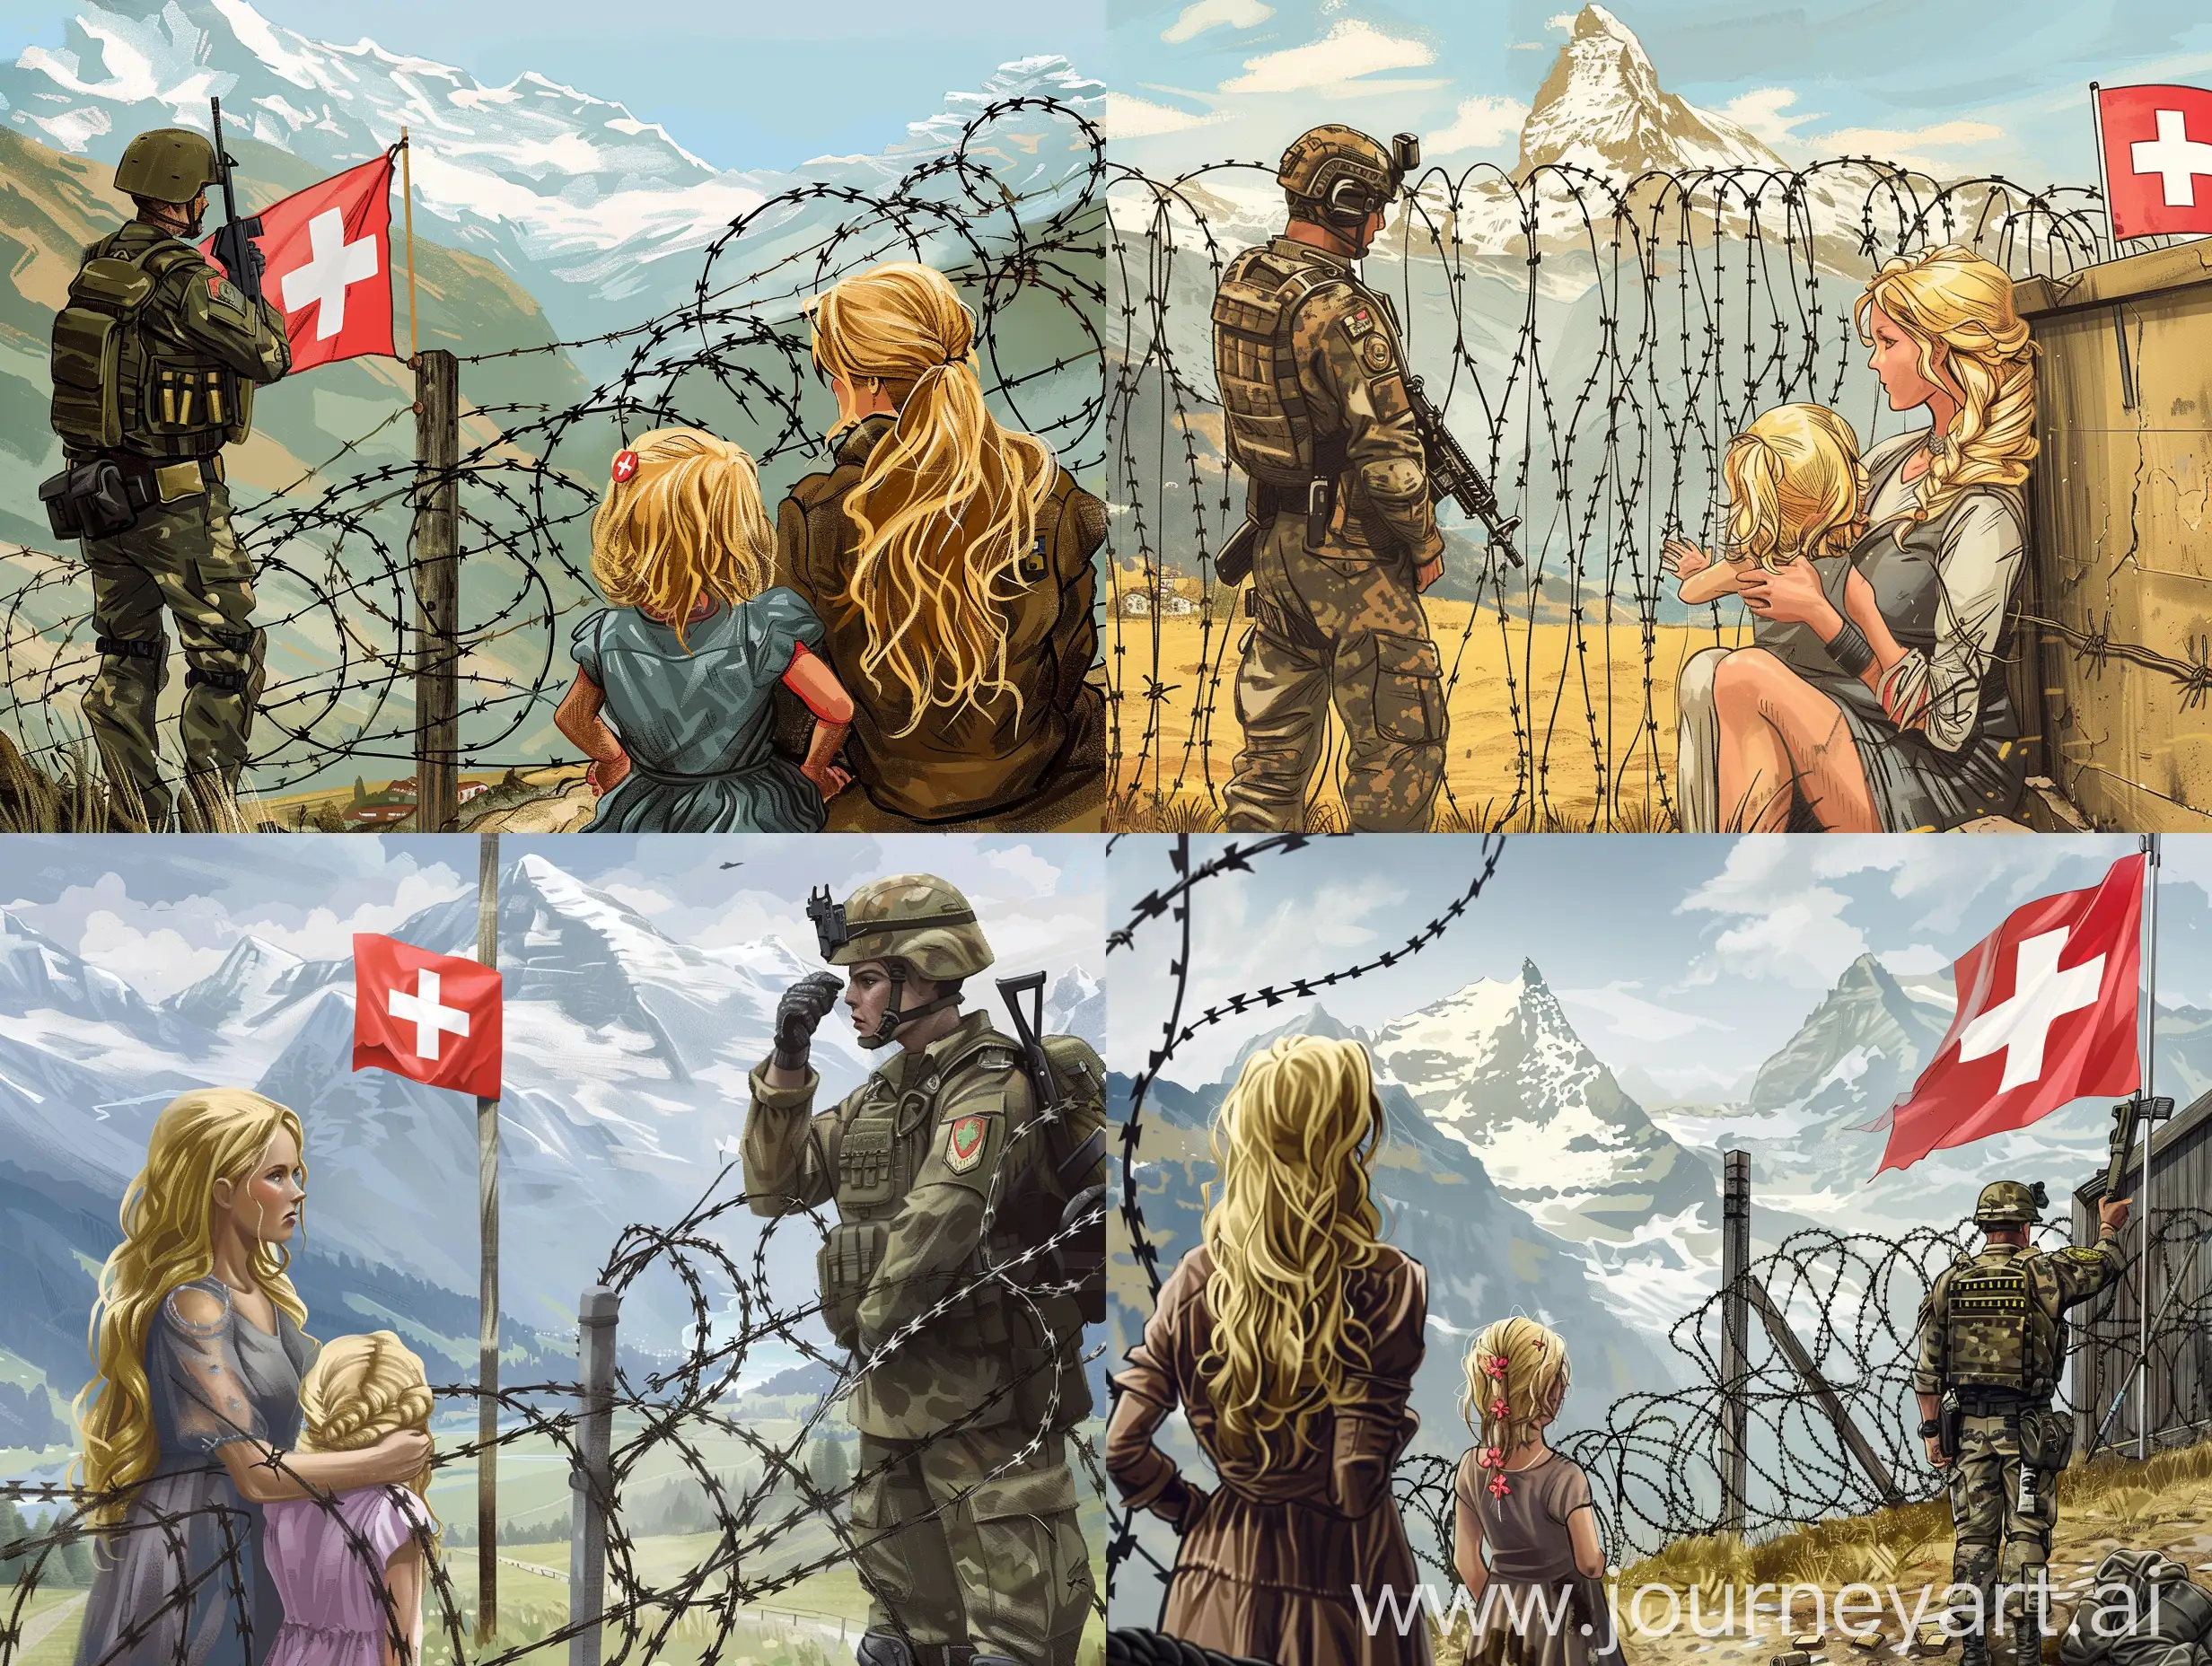 Draw me a picture of illegal immigration of a beautiful lady and her daughter with blonde hair at the border of Switzerland with a soldier standing with a gun on their head next to the barbed wire fence with the Swiss flag.